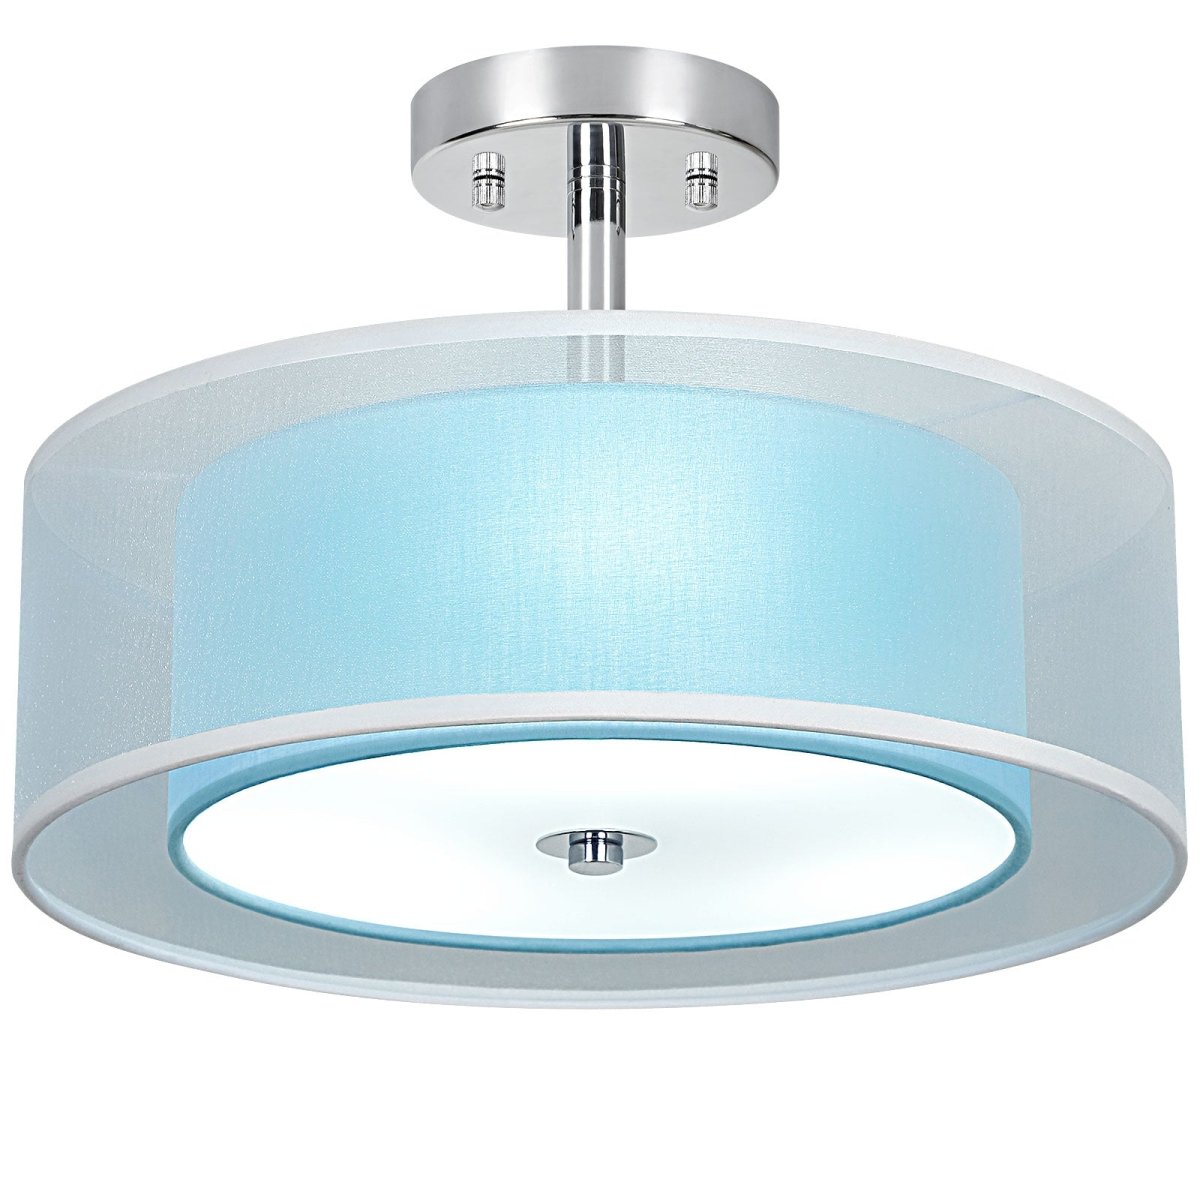 3-Light Semi Flush Mount Ceiling Light Fixture, 15'' Blue Drum Light Ceiling Hanging with Double Fabric Shade, Modern Close to Ceiling Lamp for Living Room Bedroom Kitchen Dining Room Entry Foyer - WS-FNC53-60B 1 | DEPULEY